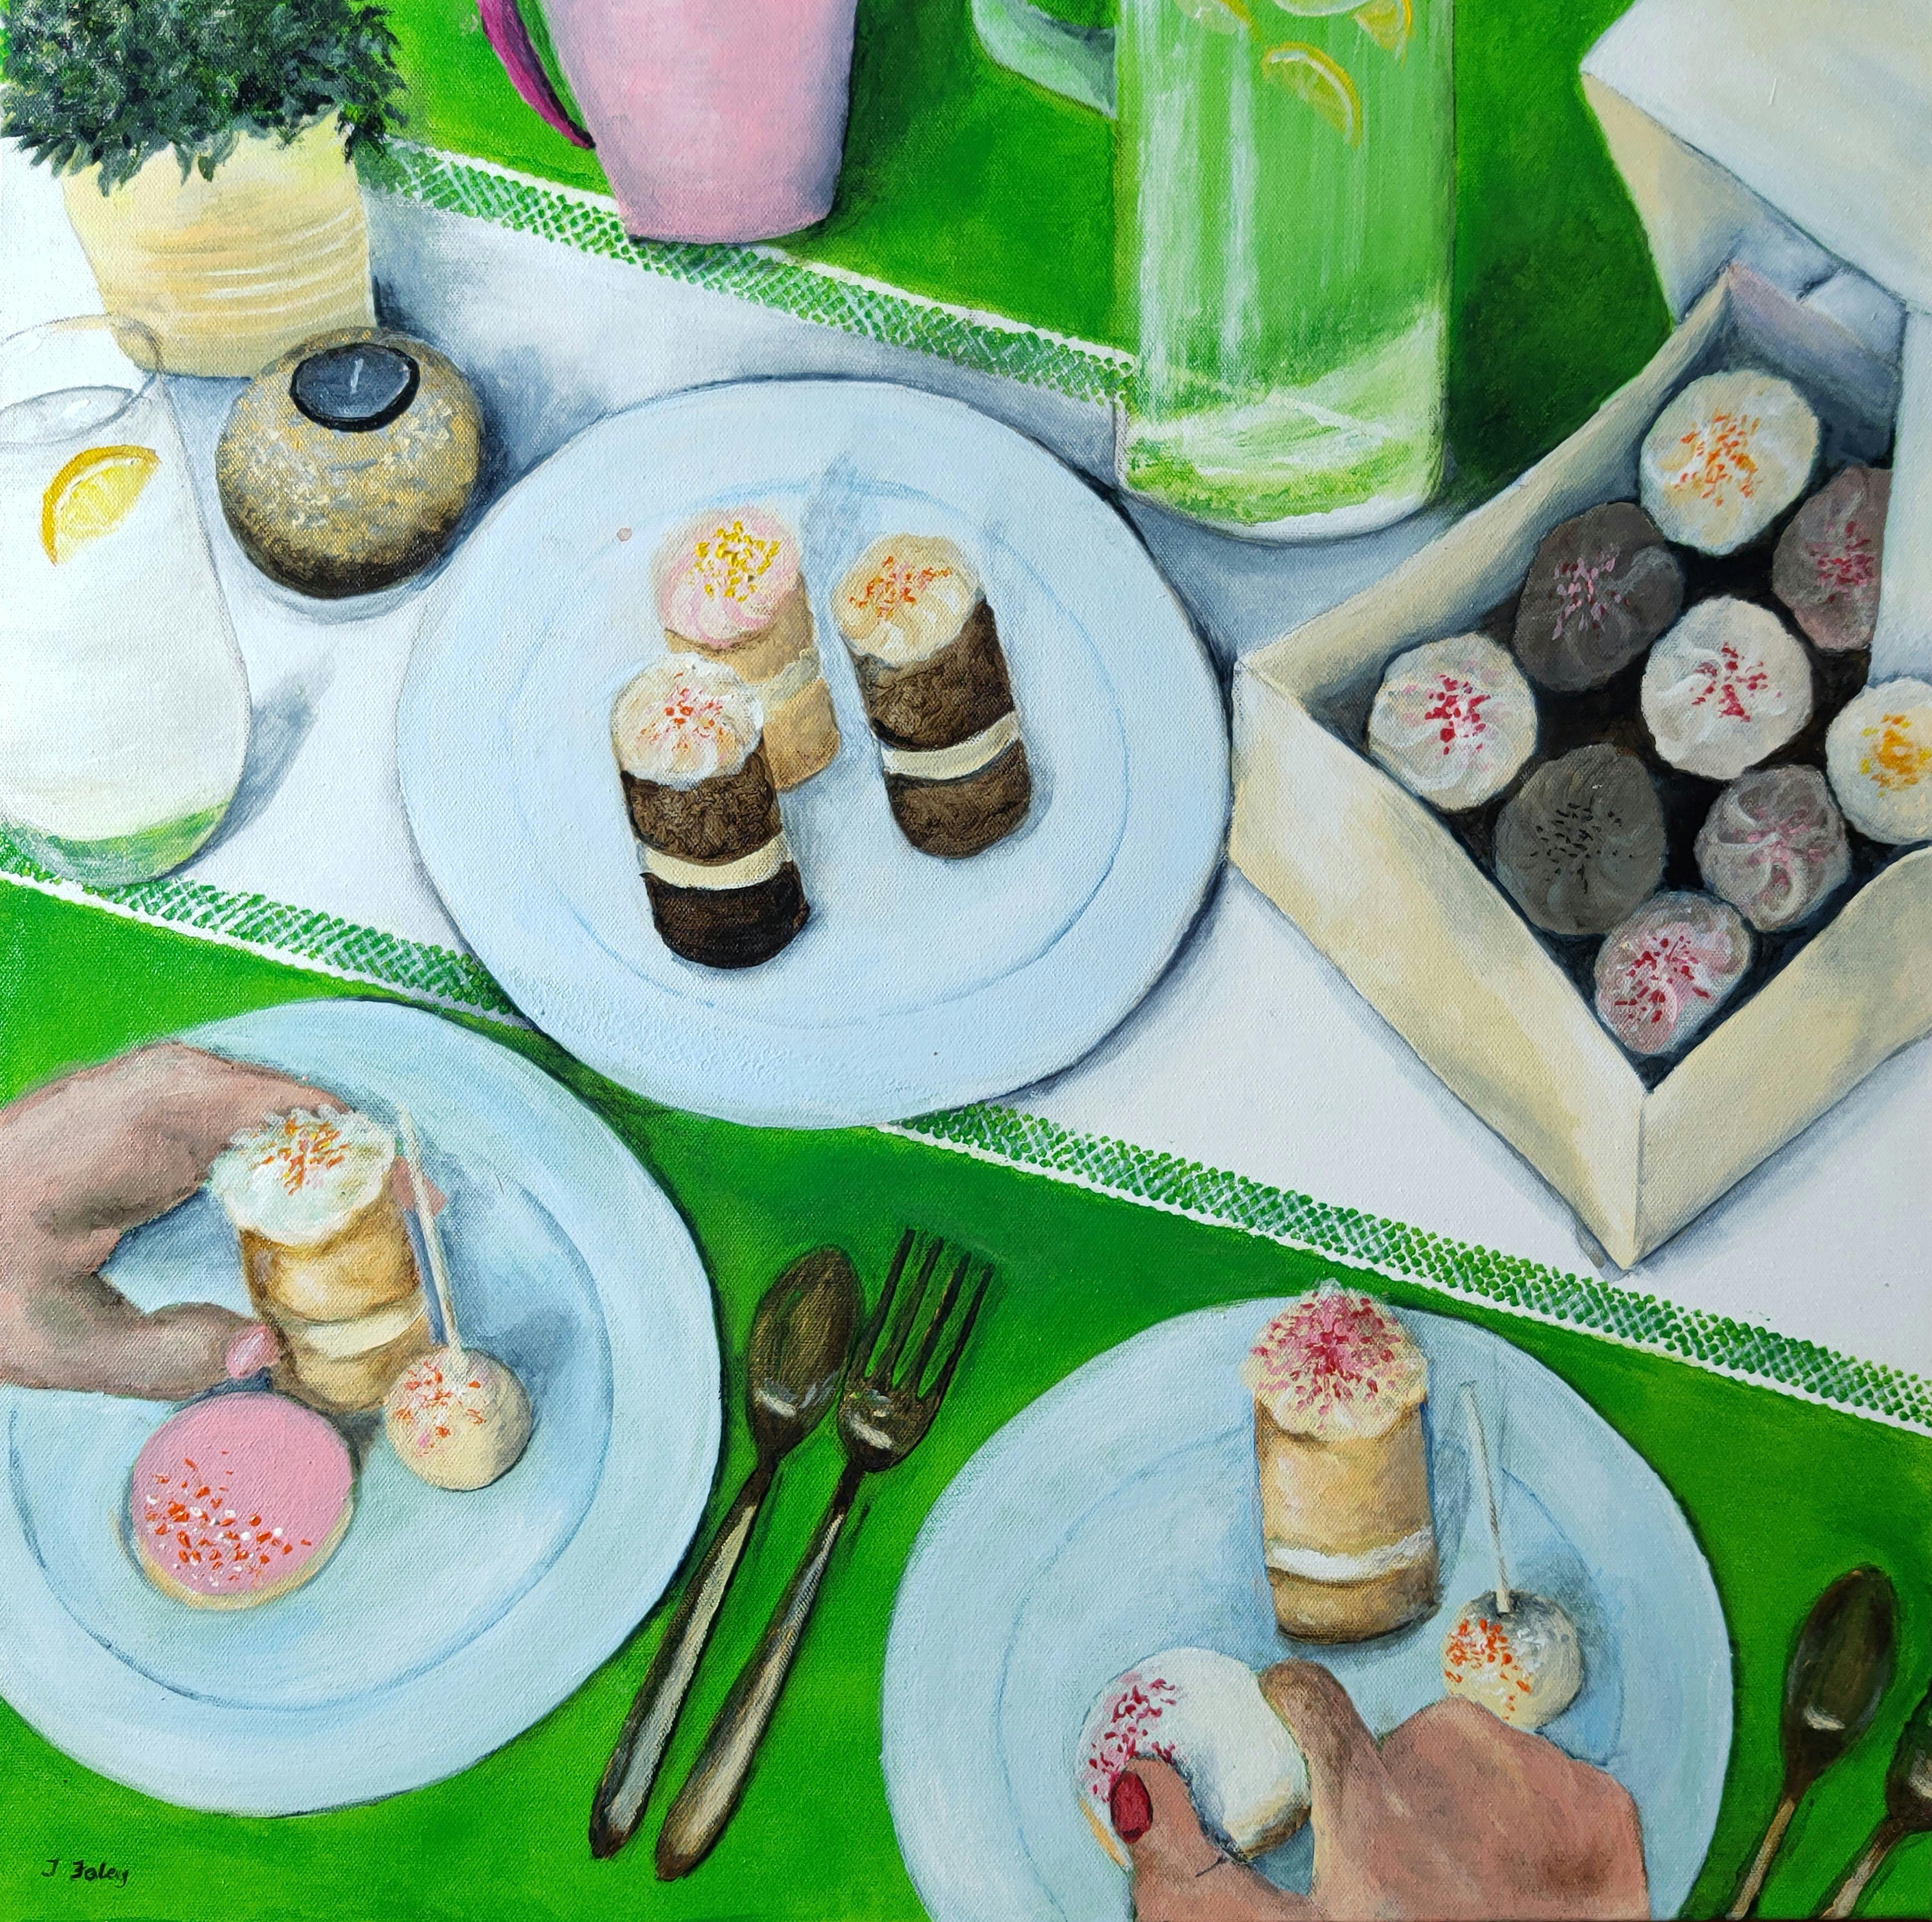 17 Therese Foley - Picnic Delights